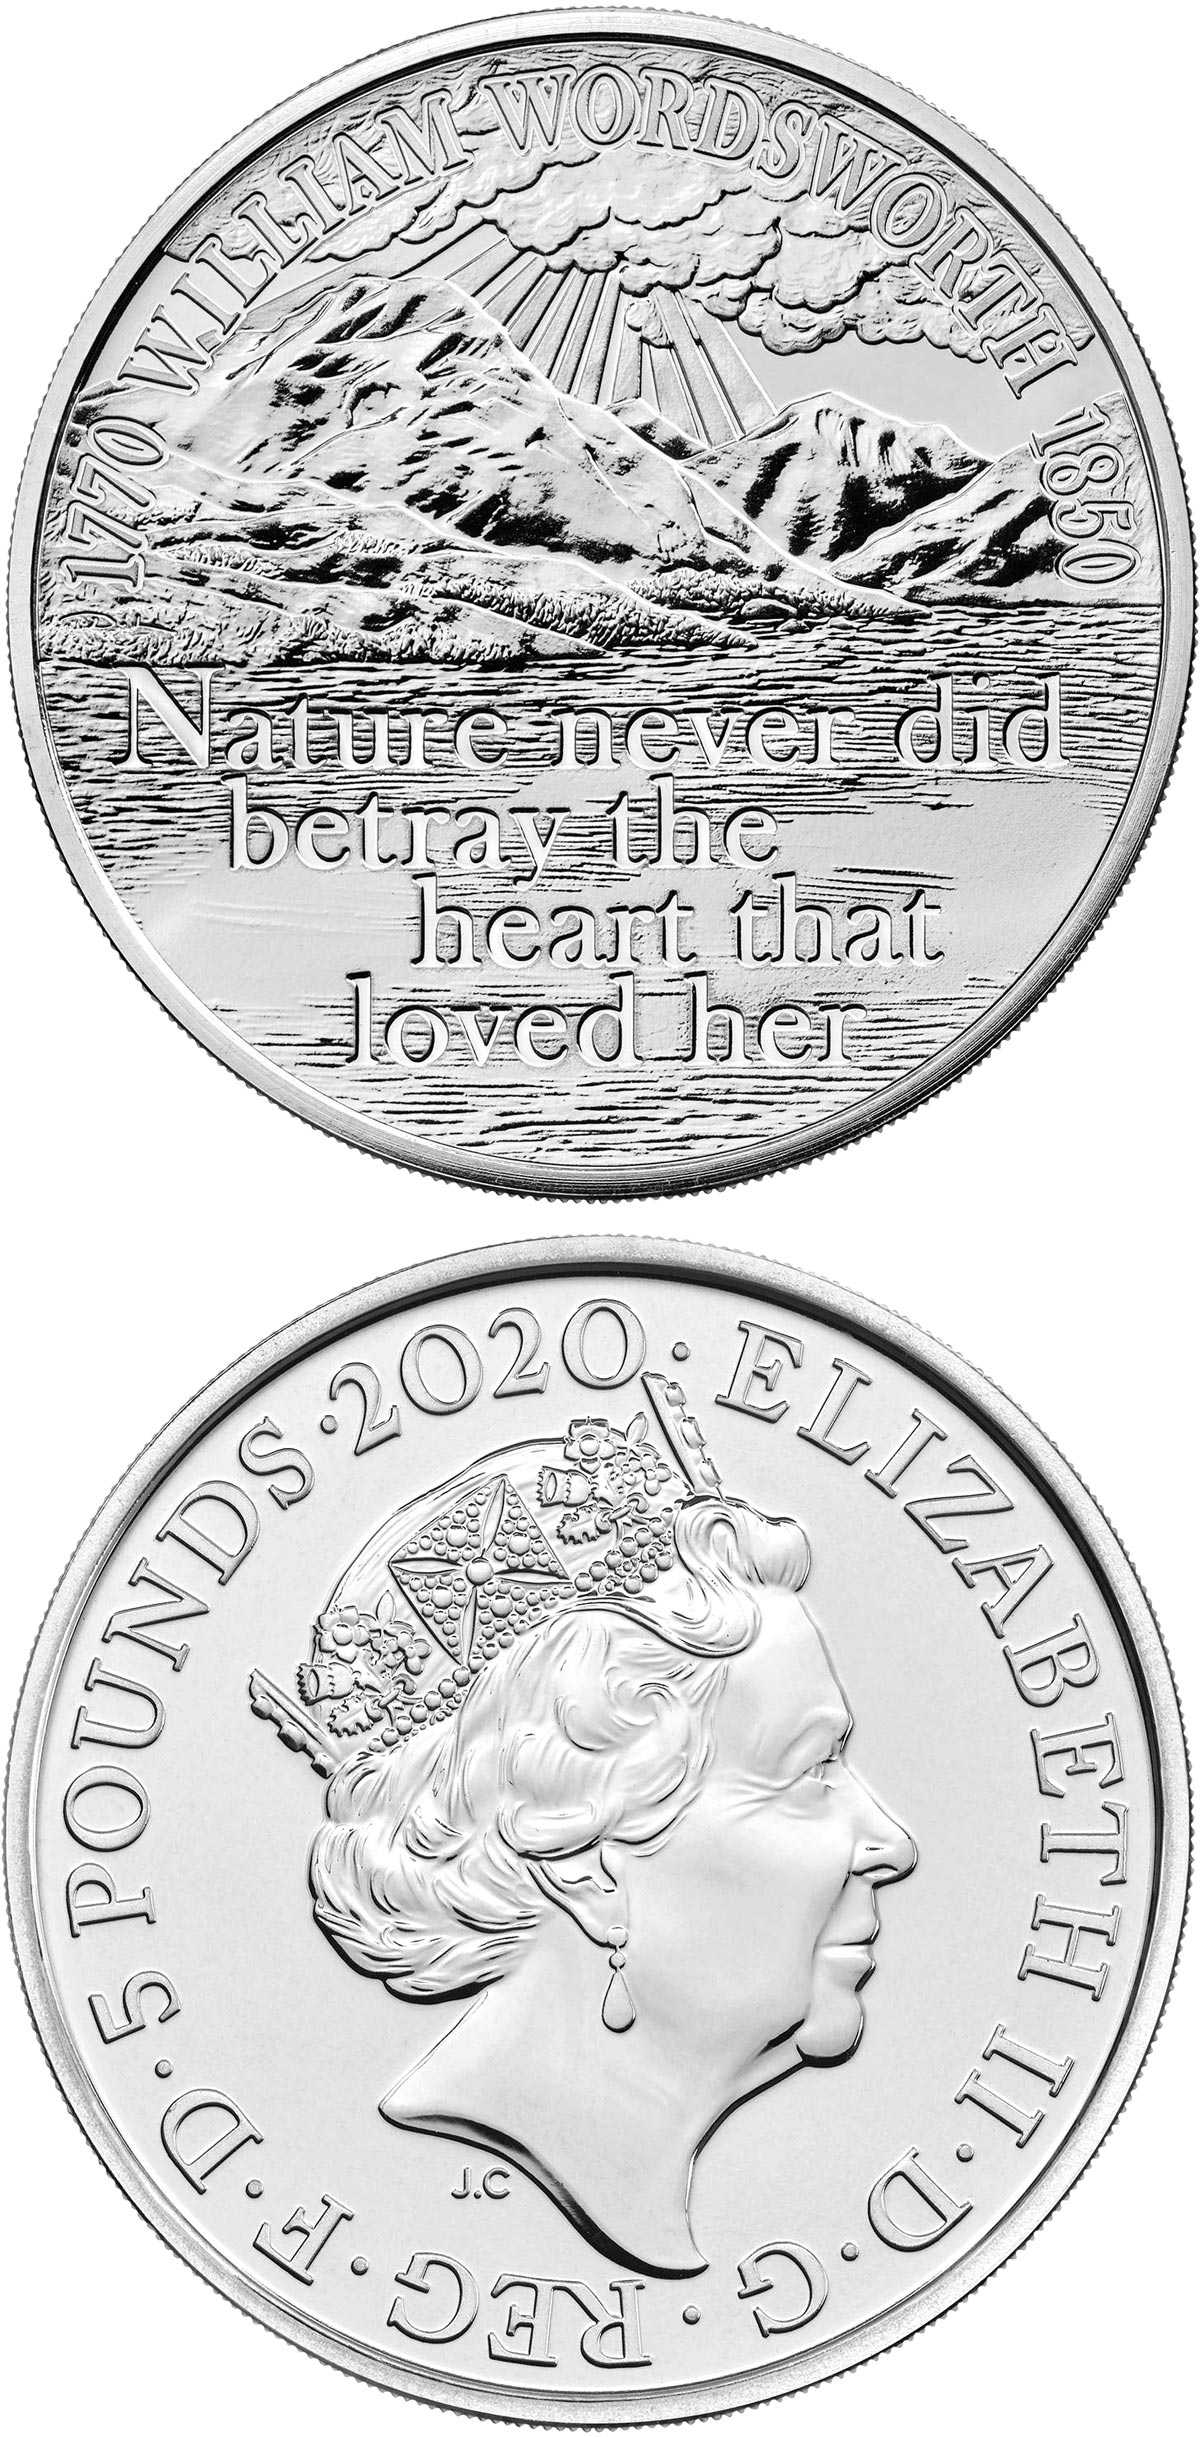 Image of 5 pounds coin - The 250th Anniversary of the Birth of William Wordsworth  | United Kingdom 2020.  The Copper–Nickel (CuNi) coin is of BU quality.